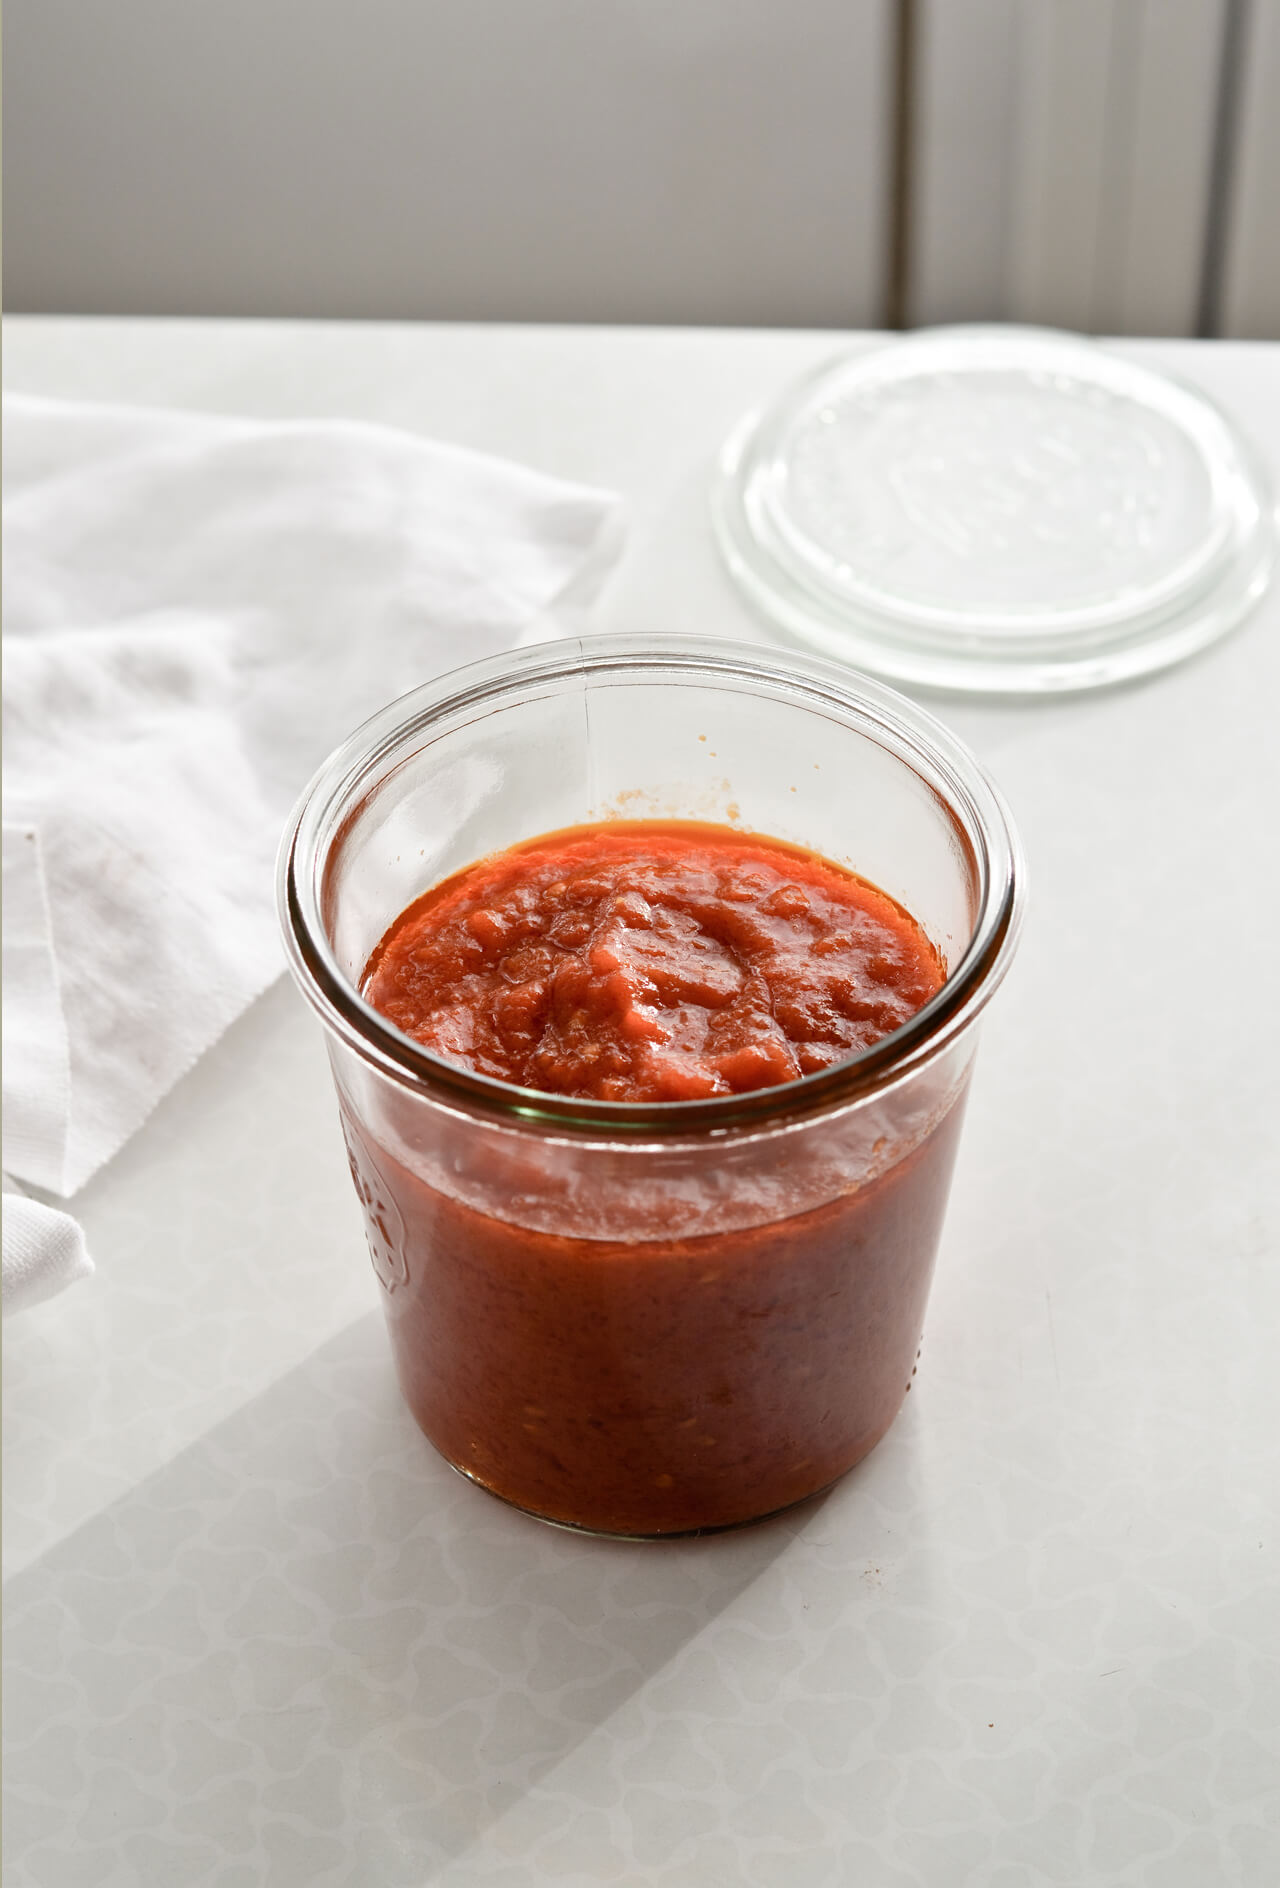 Year-round homemade tomato sauce made with canned tomatoes. Perfect for pizza and pasta.